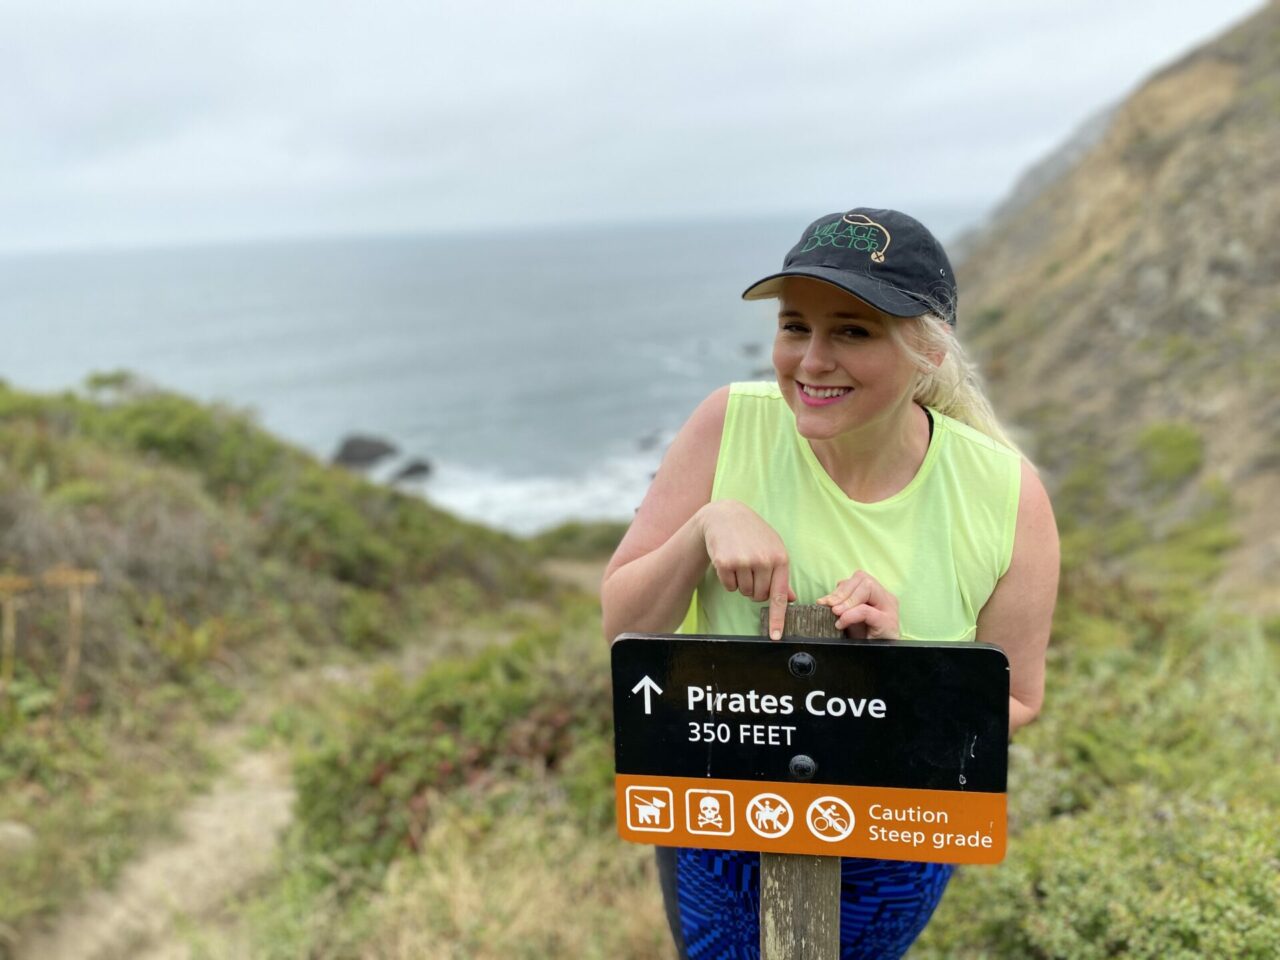 Woman in cap pointing at Pirate's Cove sign with the walkway to the beach behind